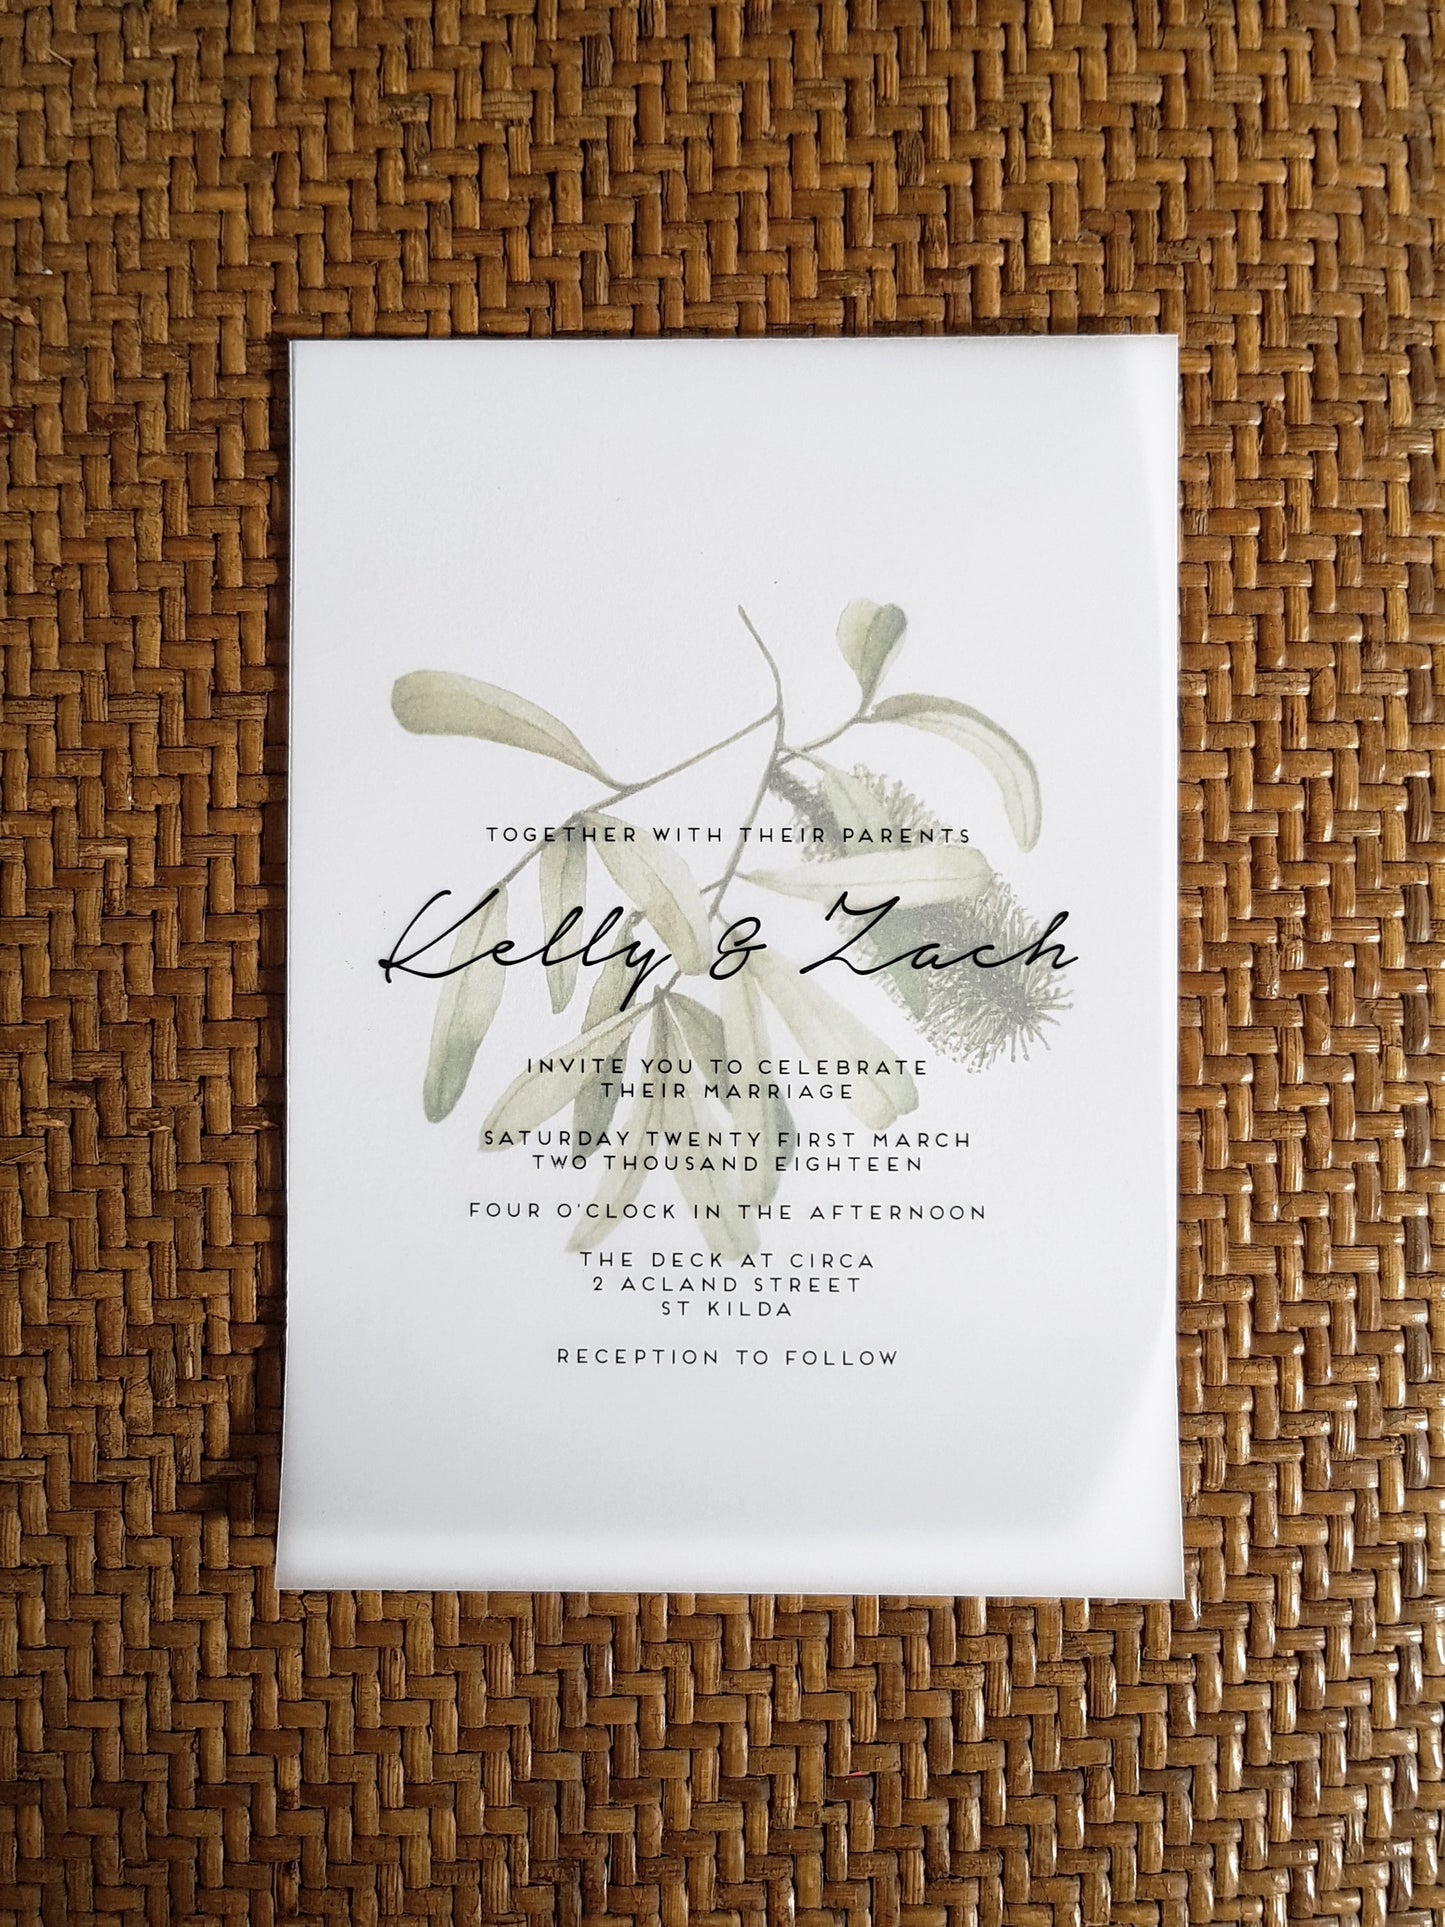 Detailed invite shot of the banksia design, using a vellum overlay for text and art print for the banksia artwork